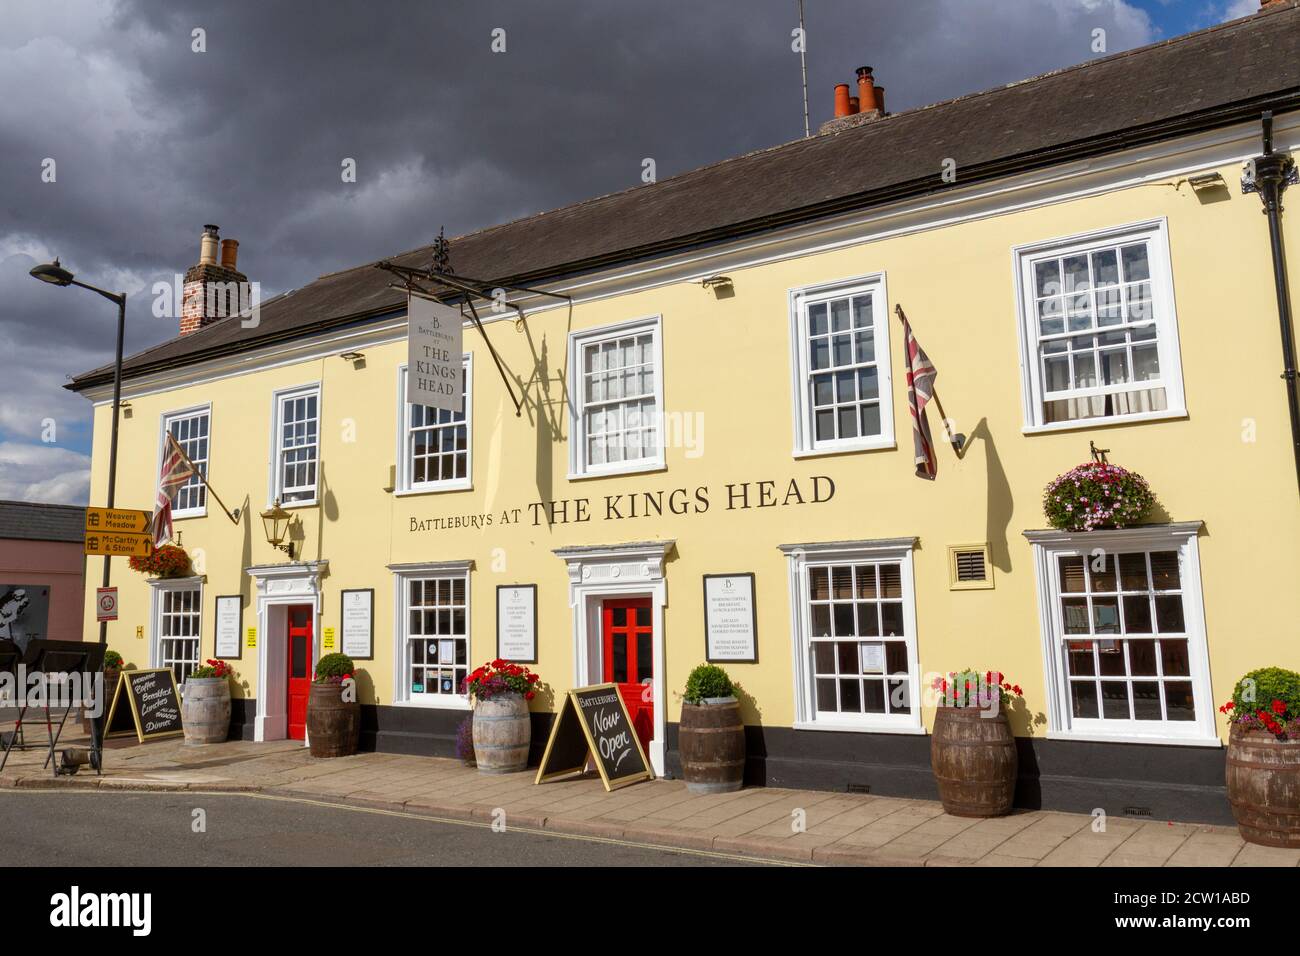 Battlebury's at The Kings Head public house in Hadleigh, an ancient market town in South Suffolk, East Anglia, UK. Stock Photo